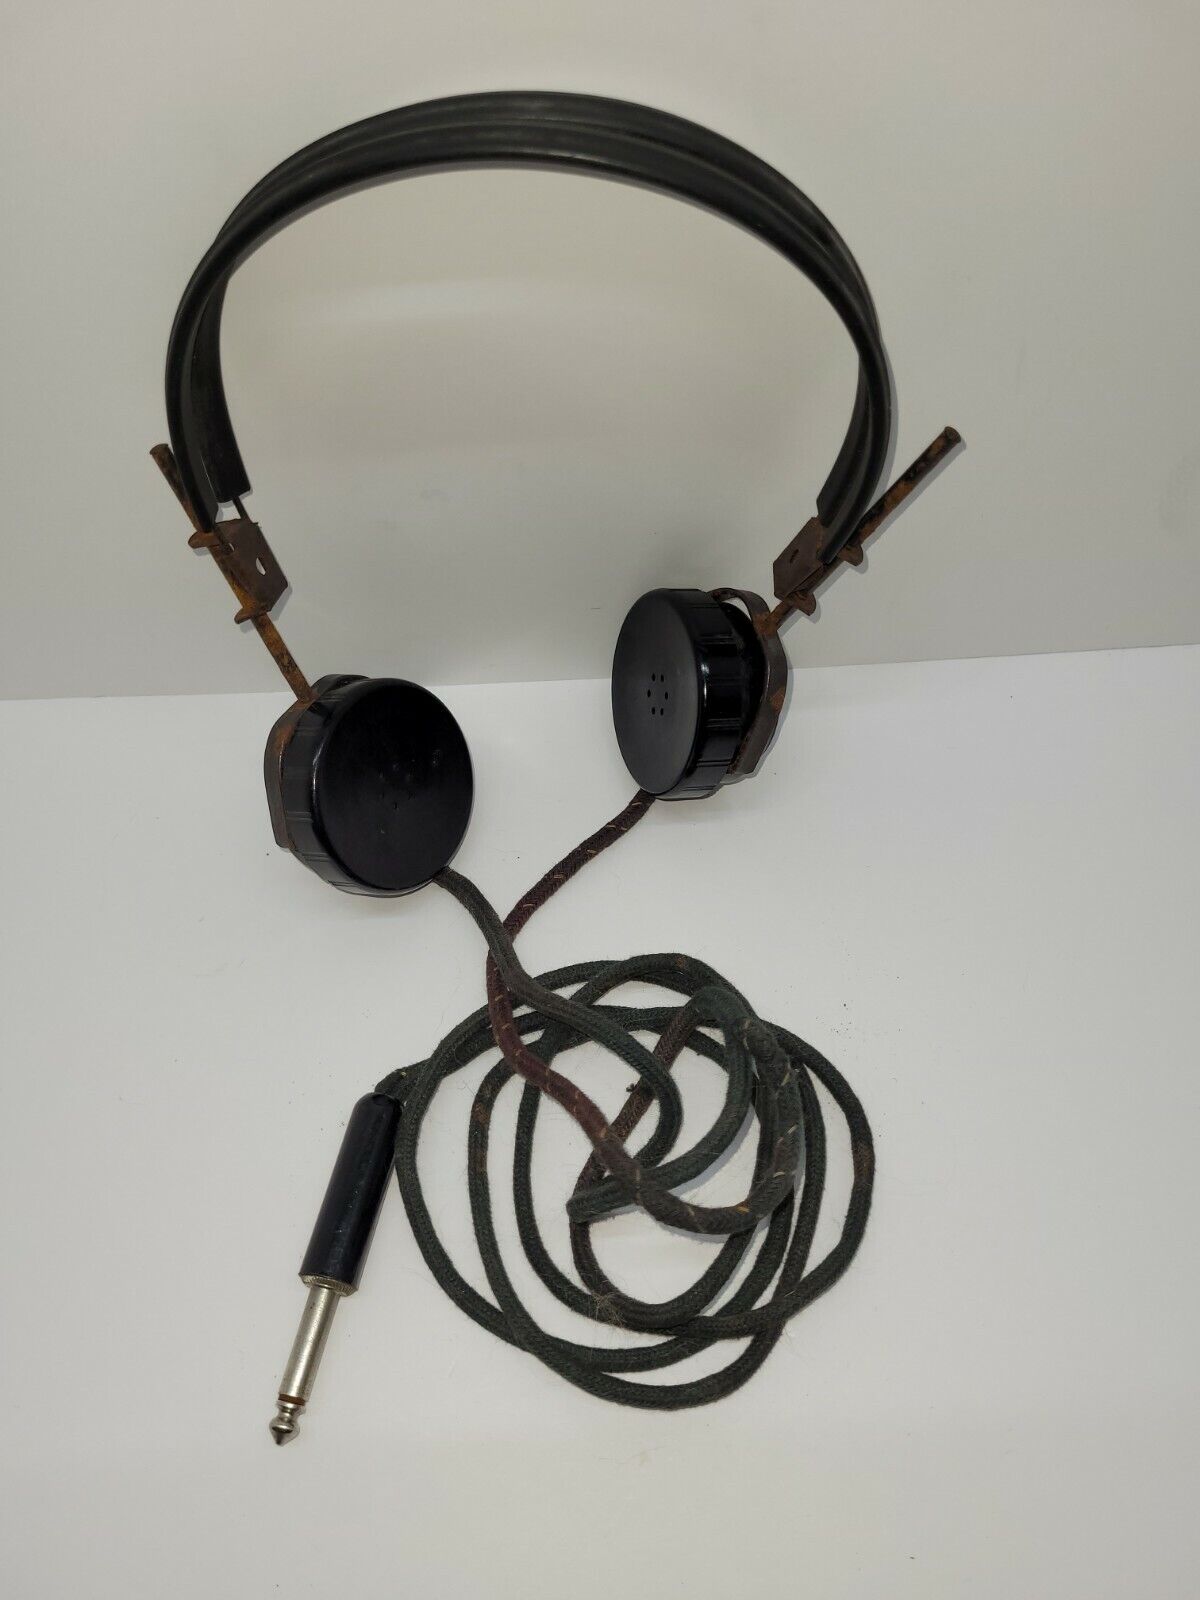 Newcomb Audio Products Headset